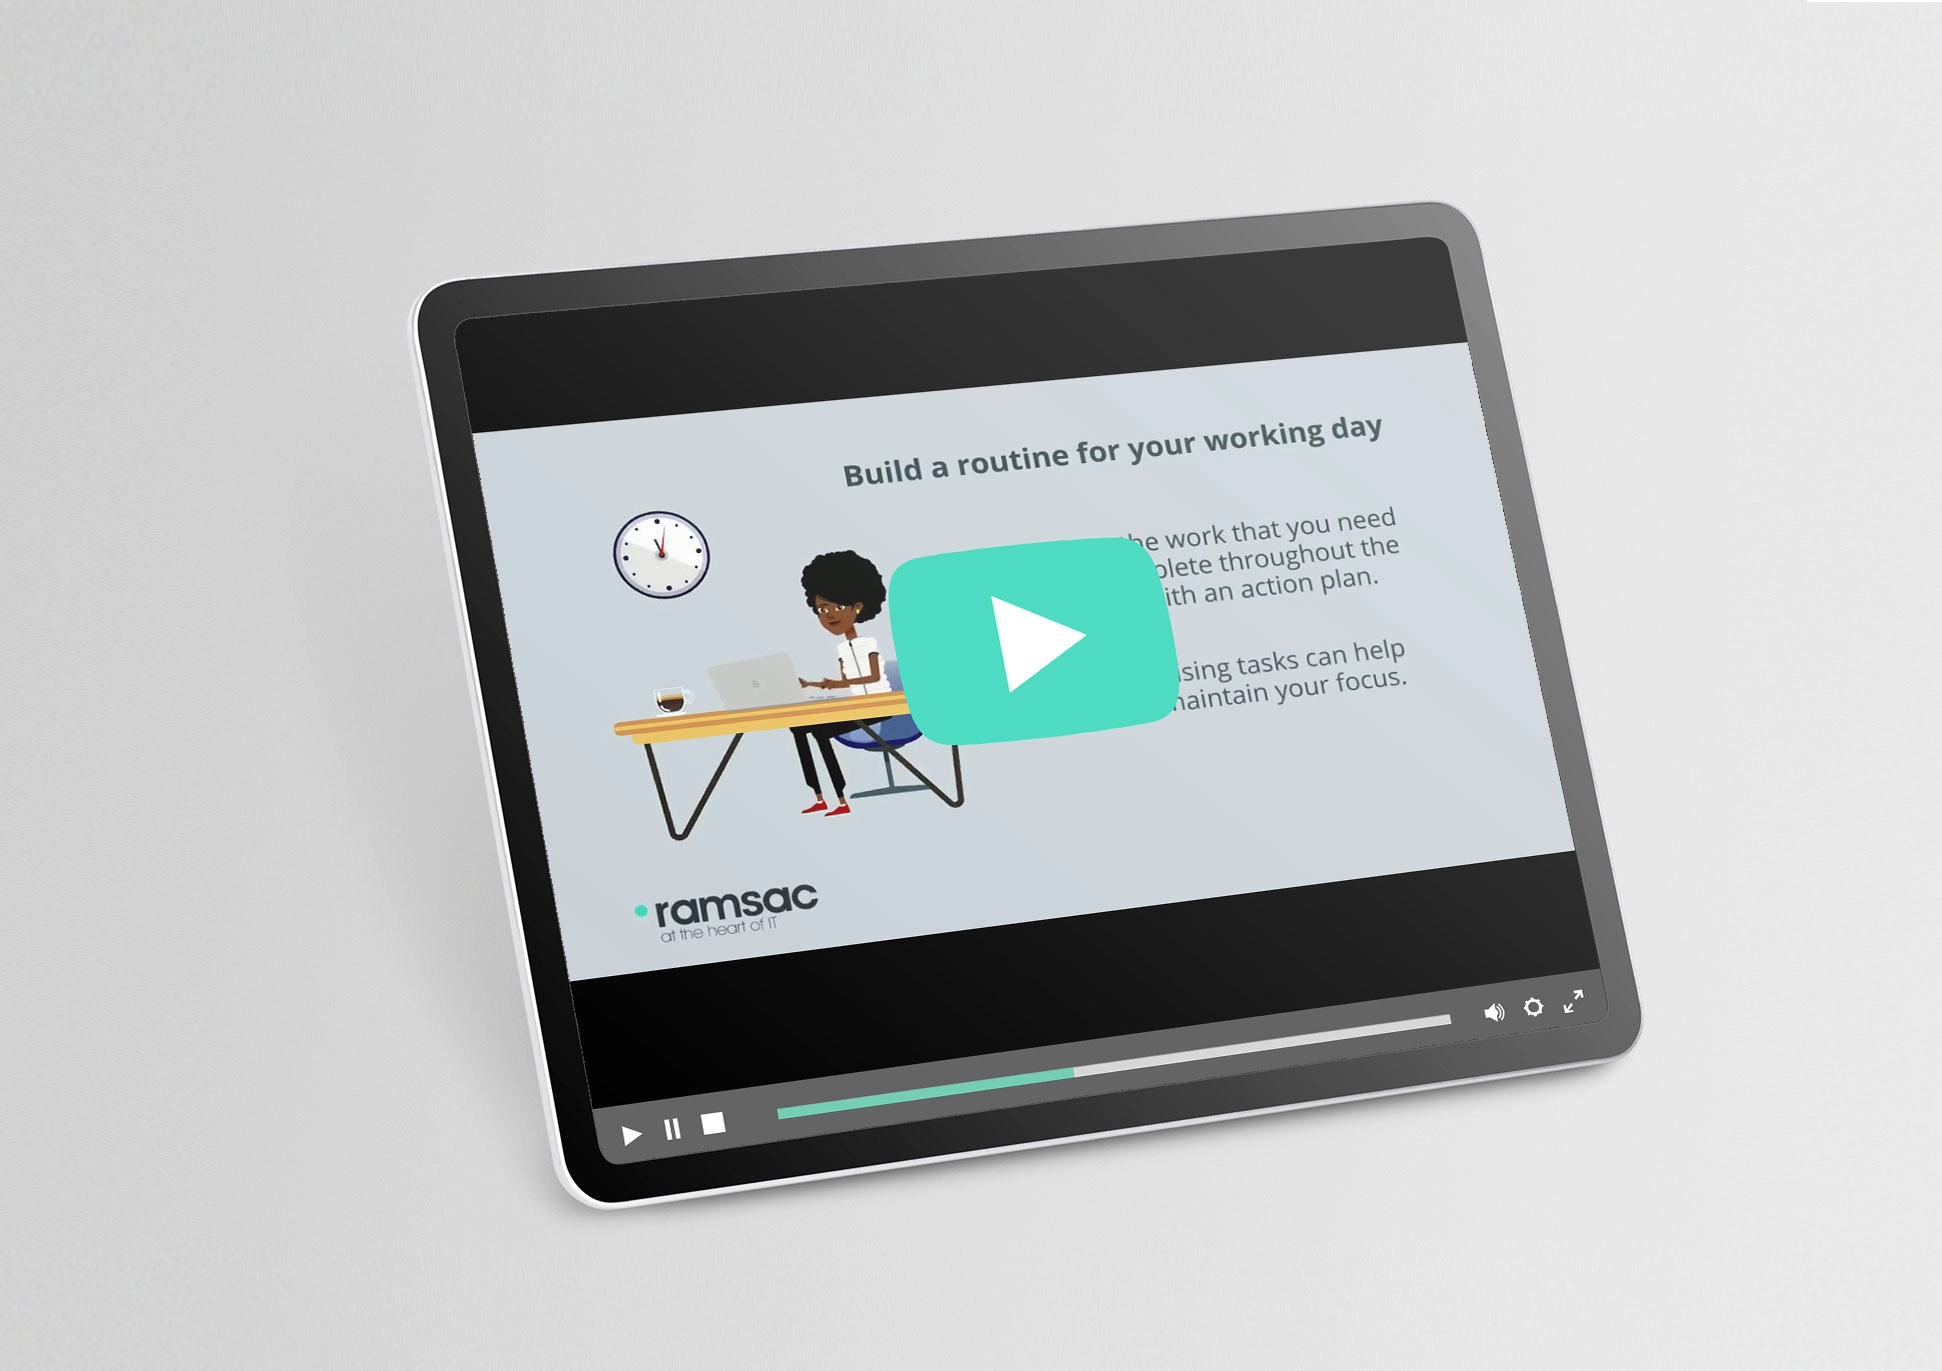 Video – Tips for remote working